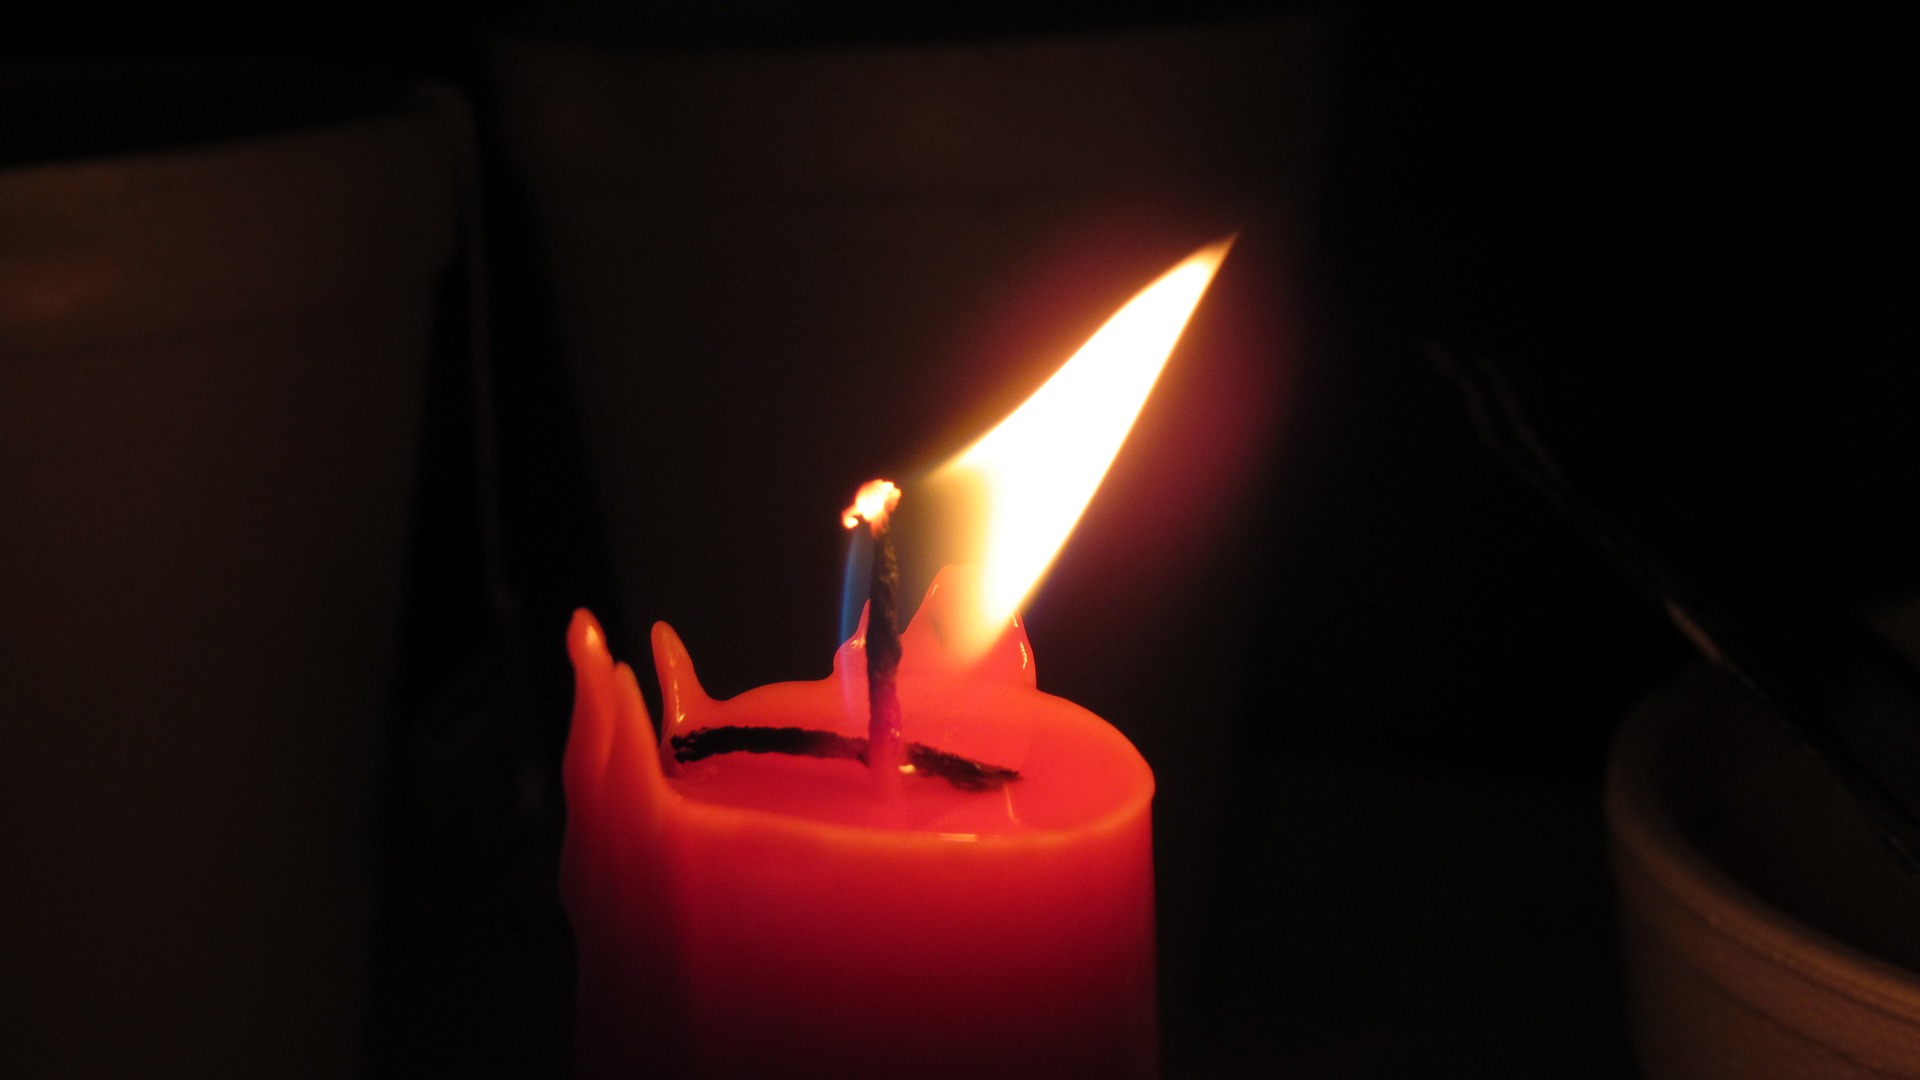 Candle Flame Glowing Wallpaper - Hd Wallpaper Candle Red - HD Wallpaper 